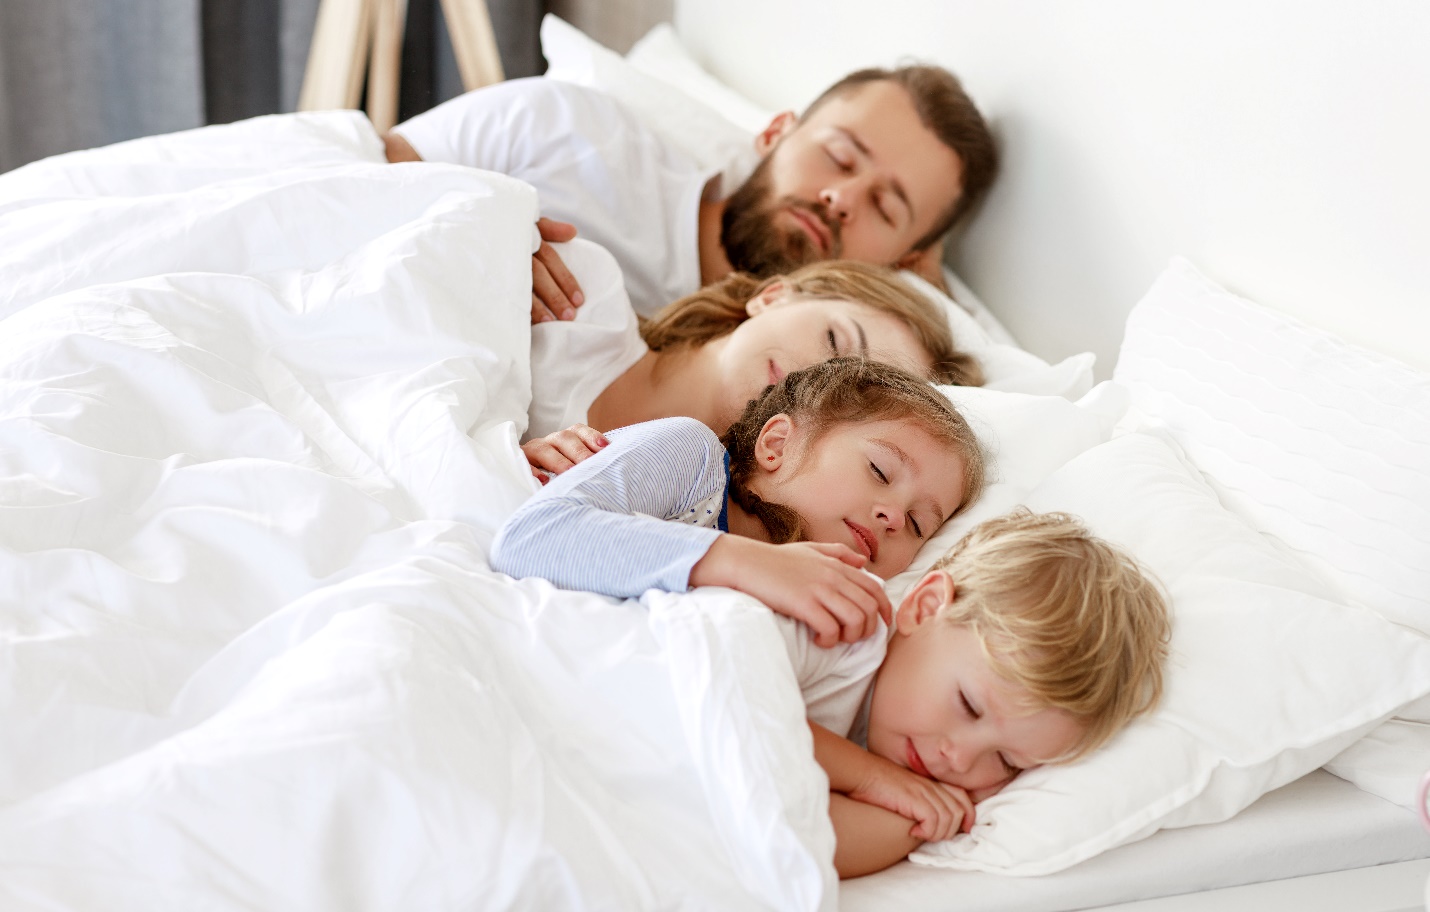 A person and two children lying in a bed

Description automatically generated with low confidence